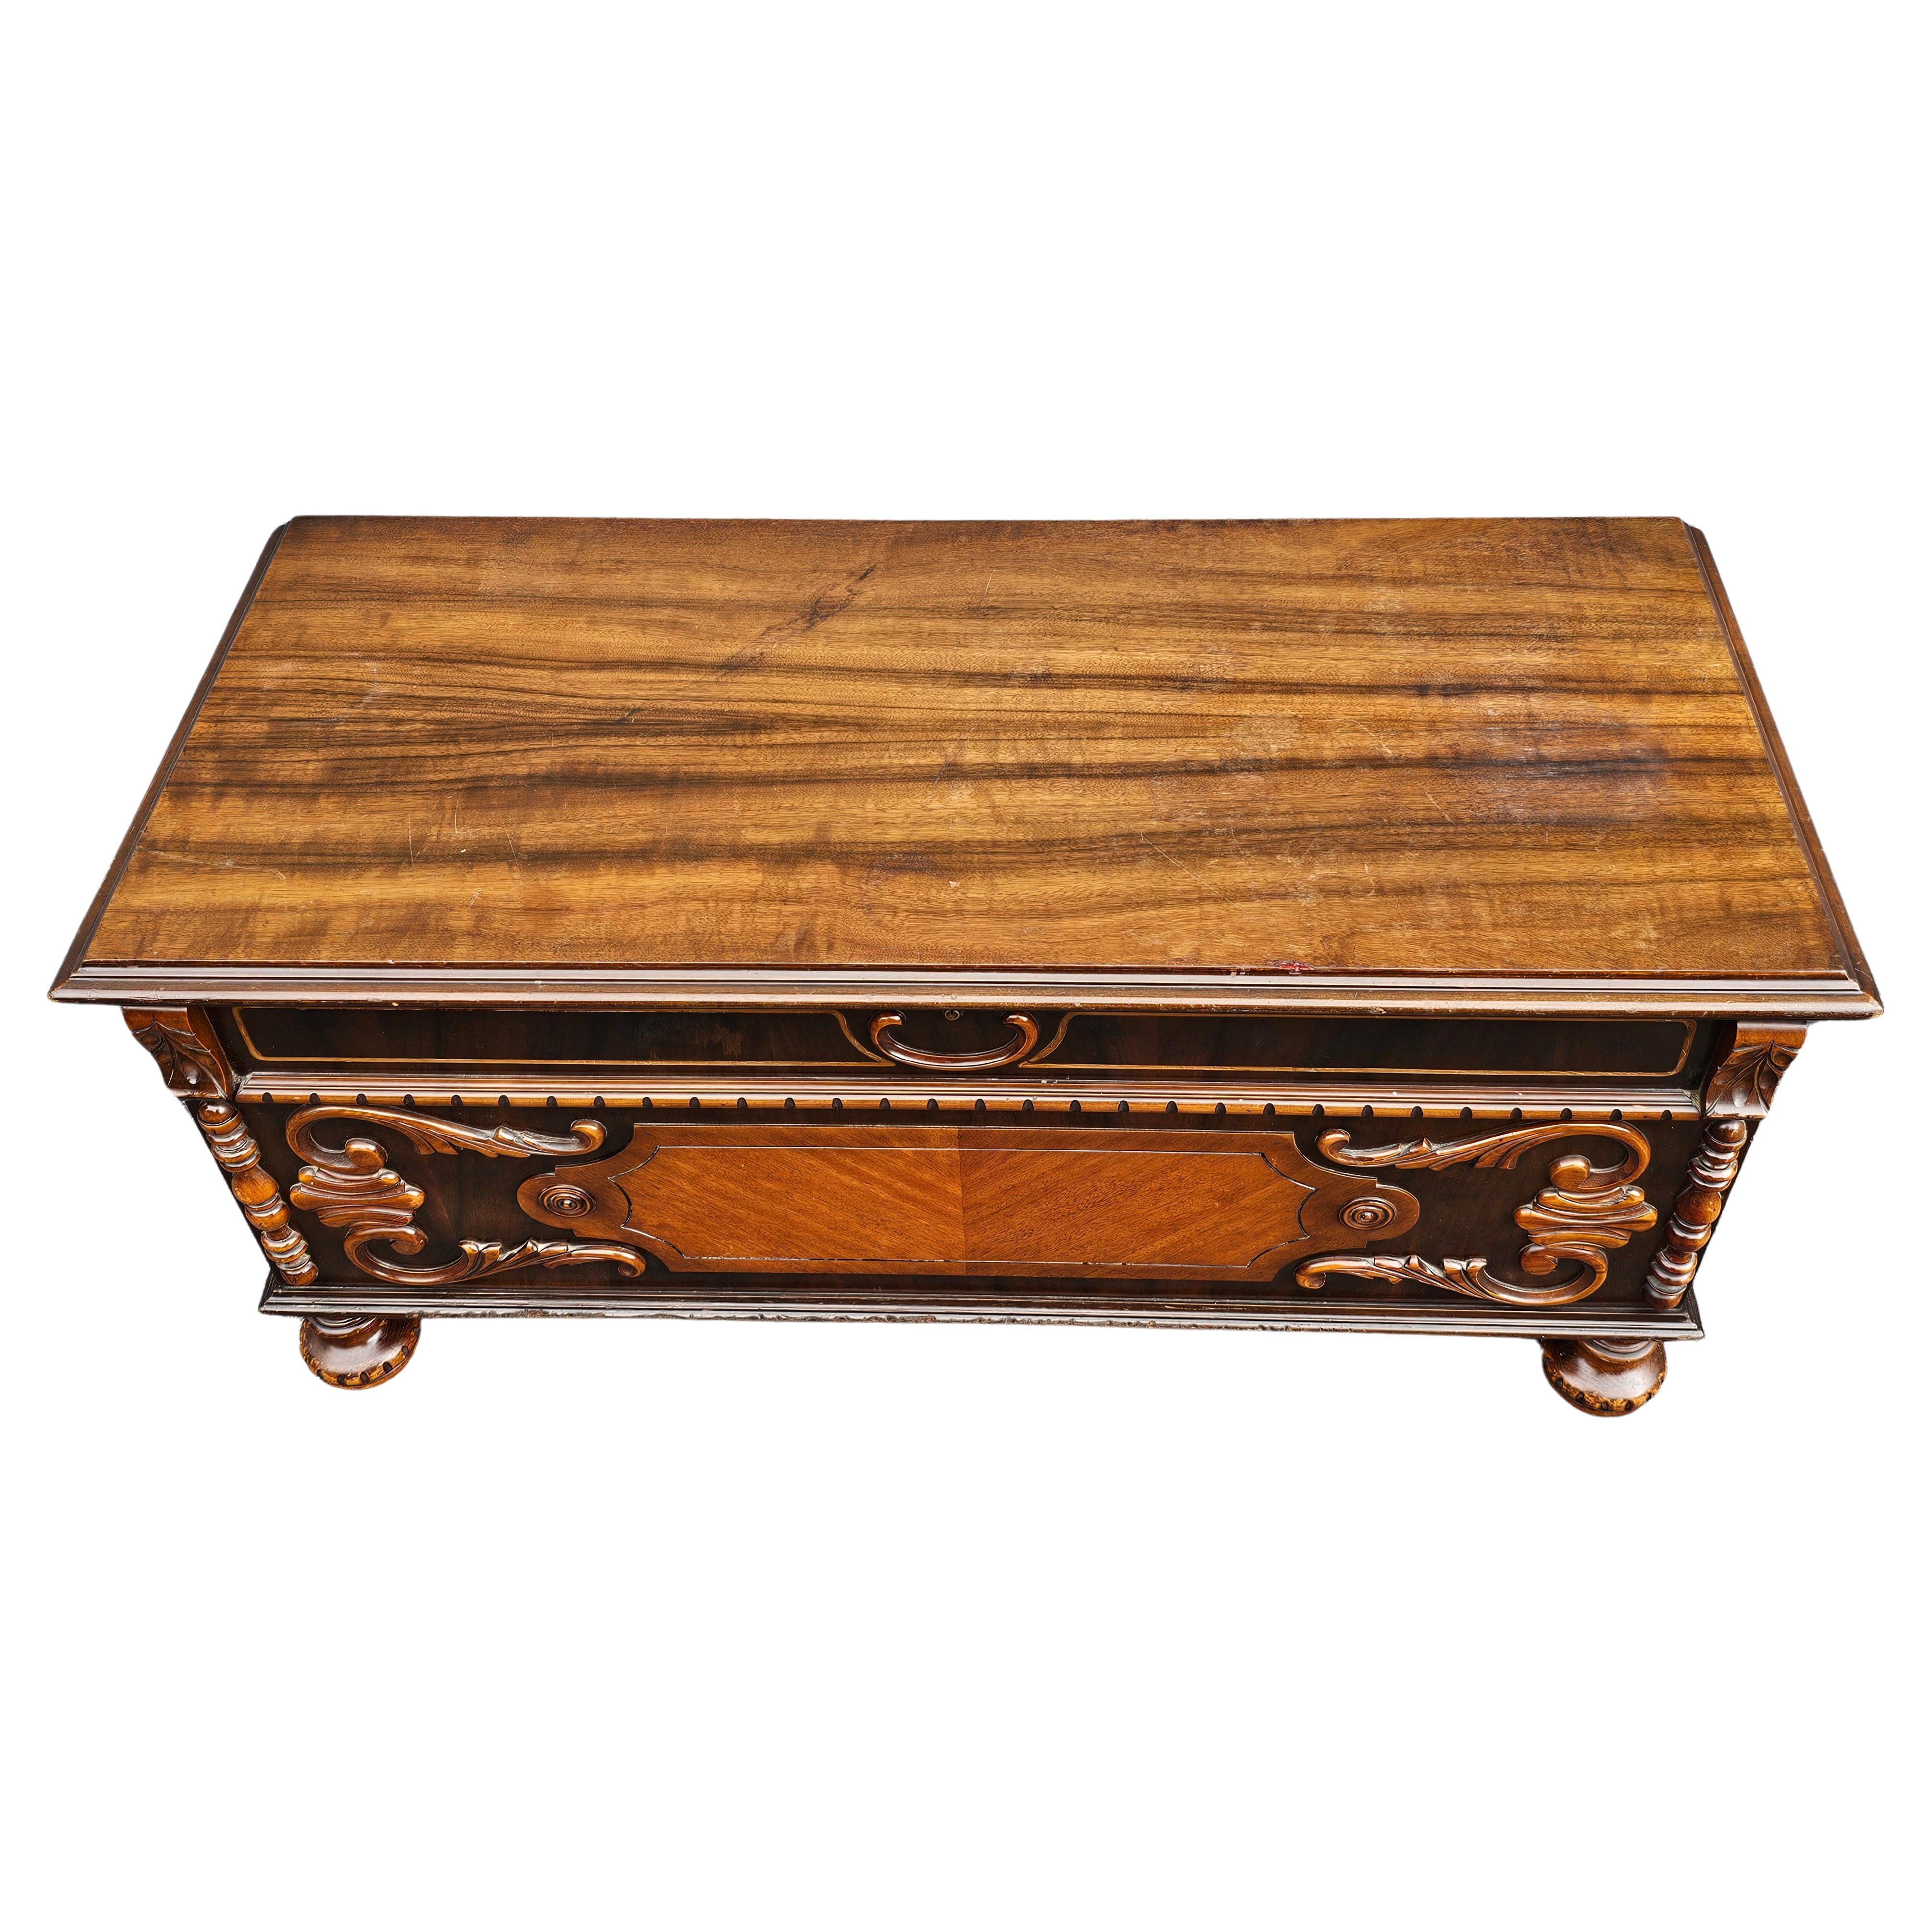 Early 2oth Century Haverty Furniture William And Mary Style Carved Mahogany and Cedar lined Blanket Chest.
Measures 44